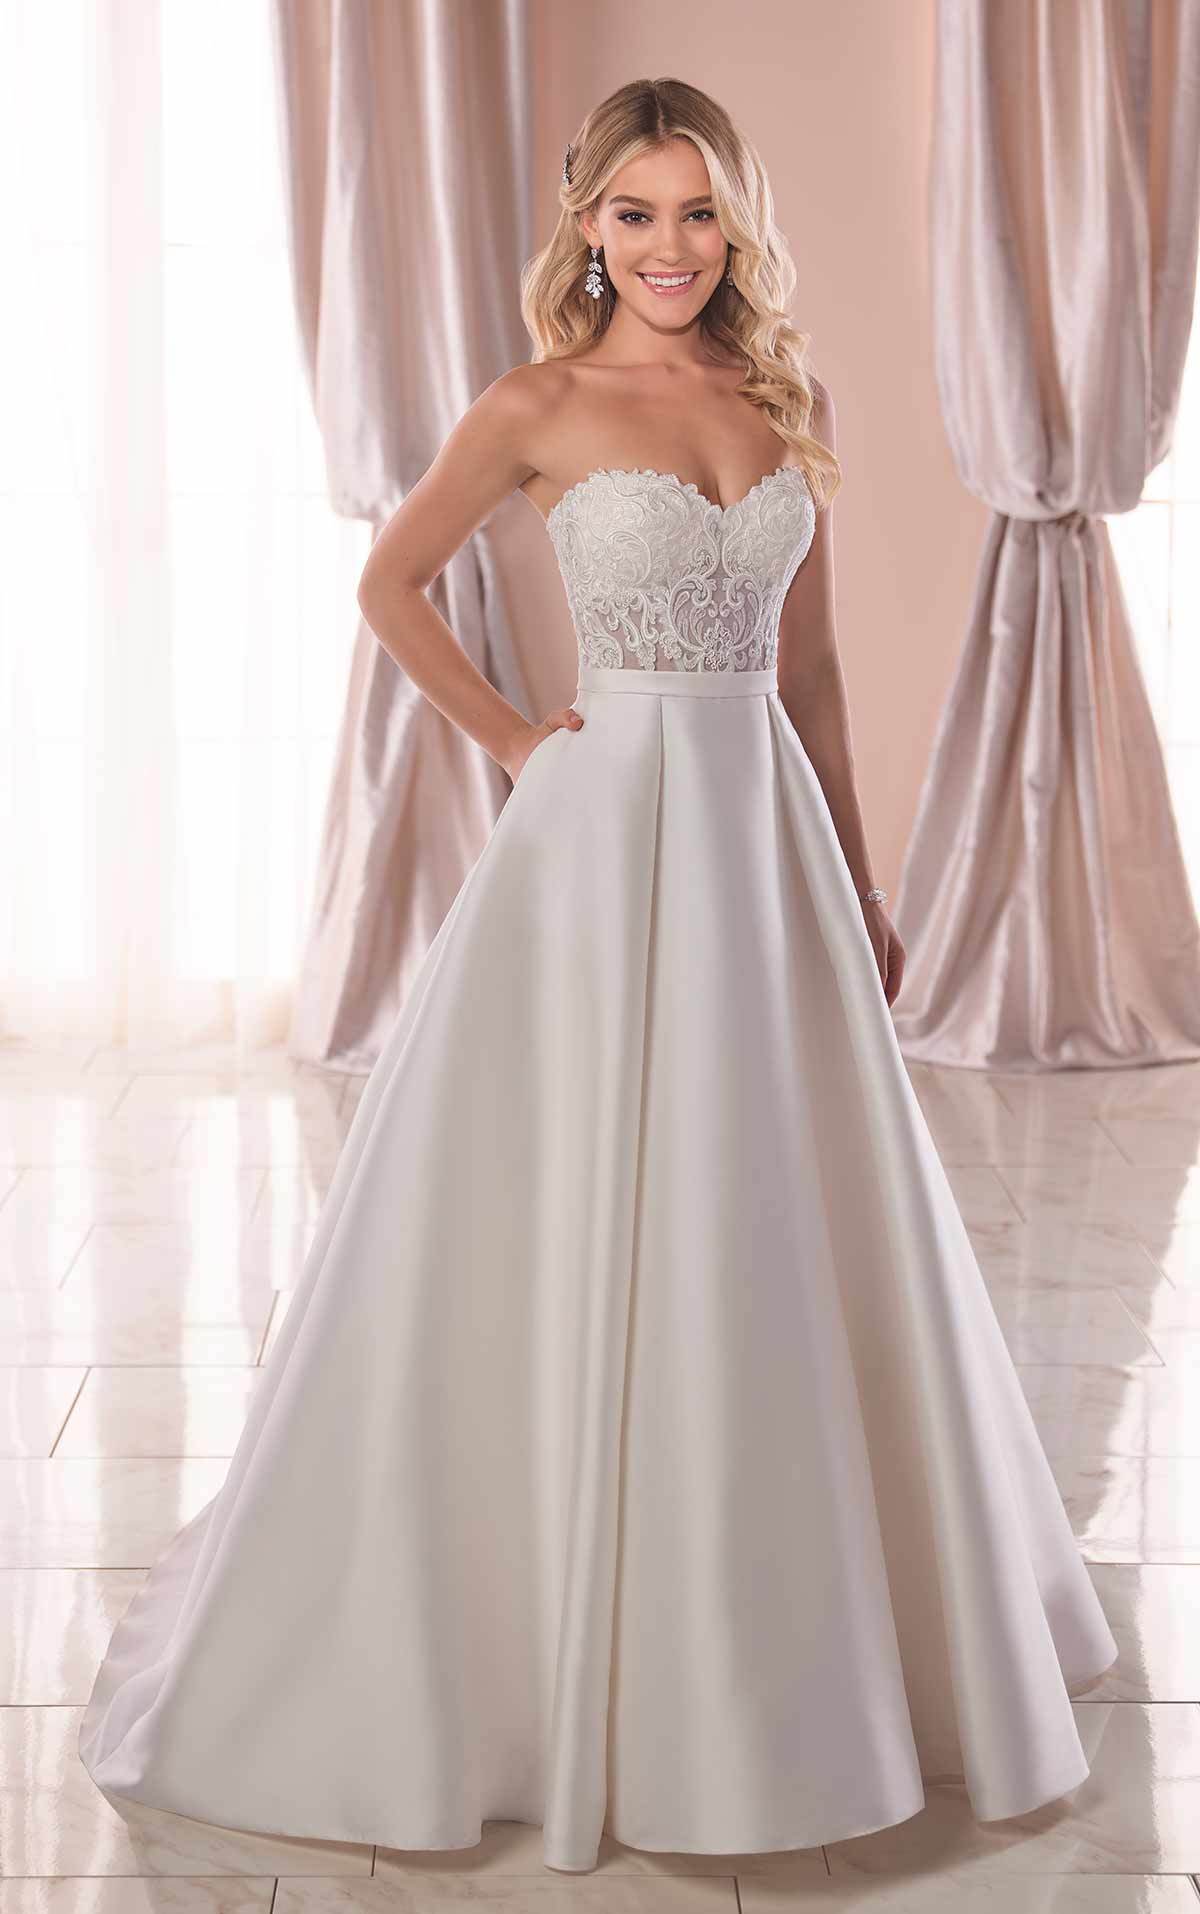 Great What Wedding Dress Should I Wear Quiz in the world Learn more here 